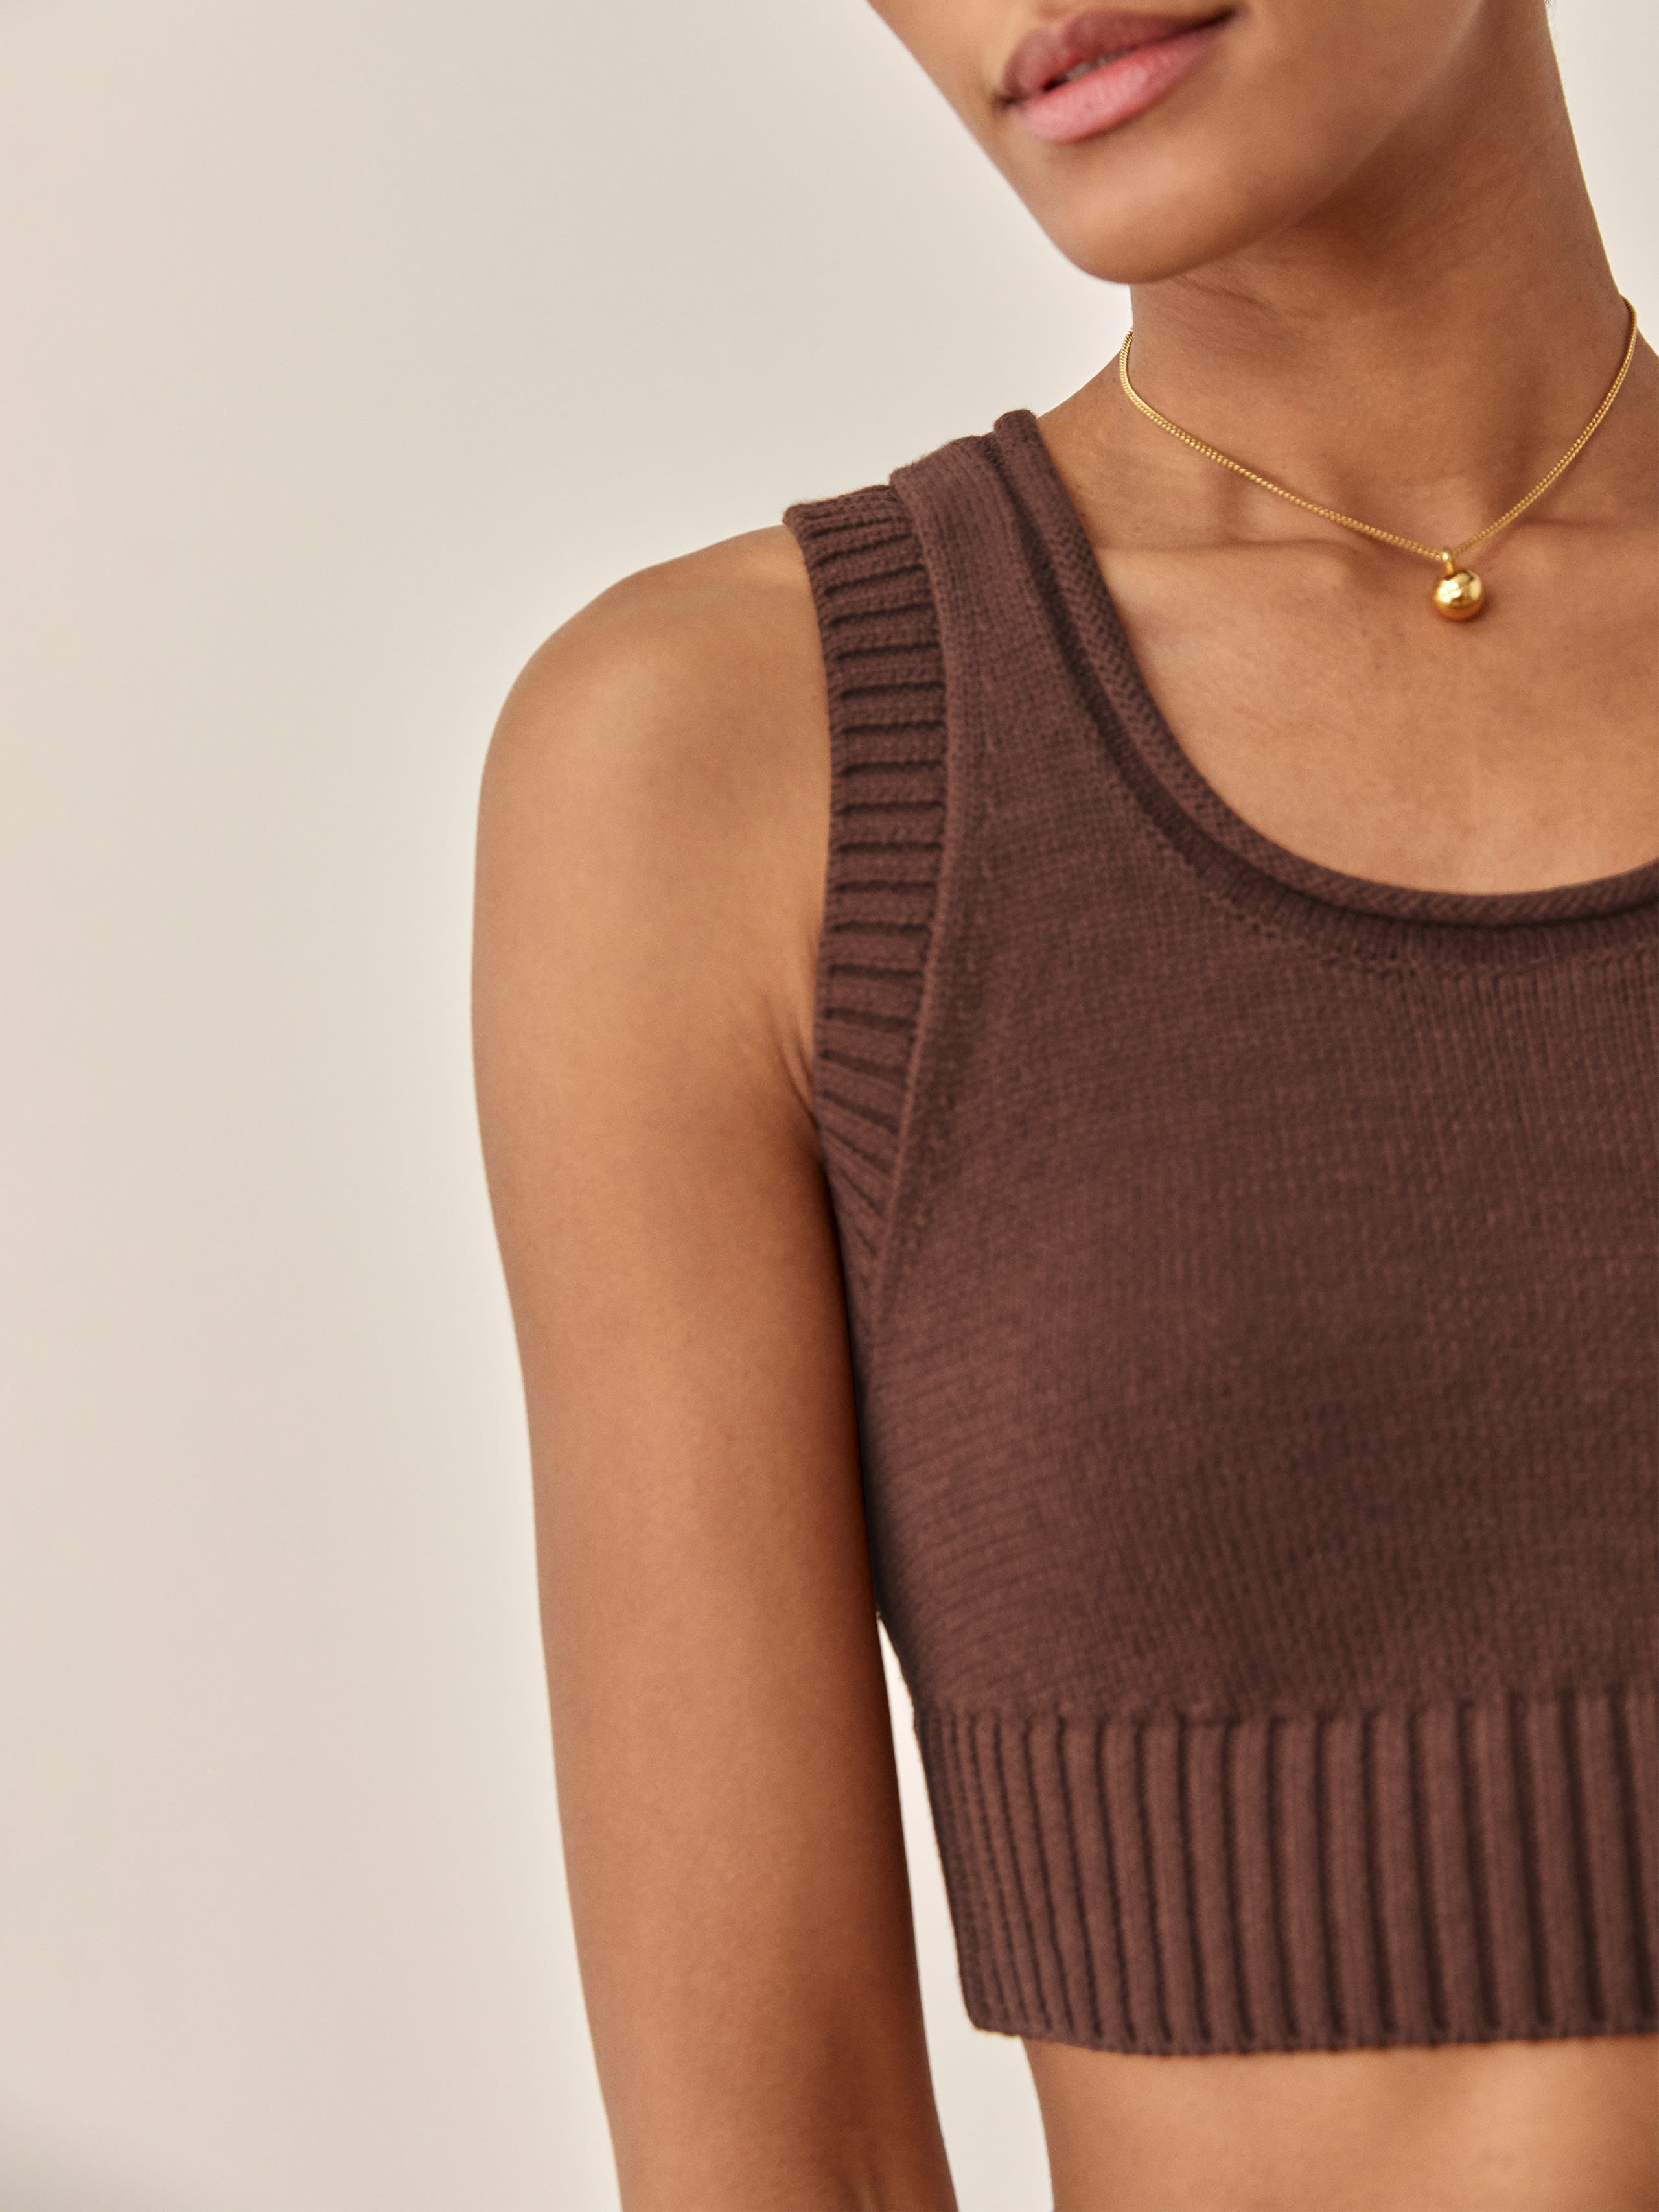 Reformation Norma Cotton Sweater Tank In Chestnut